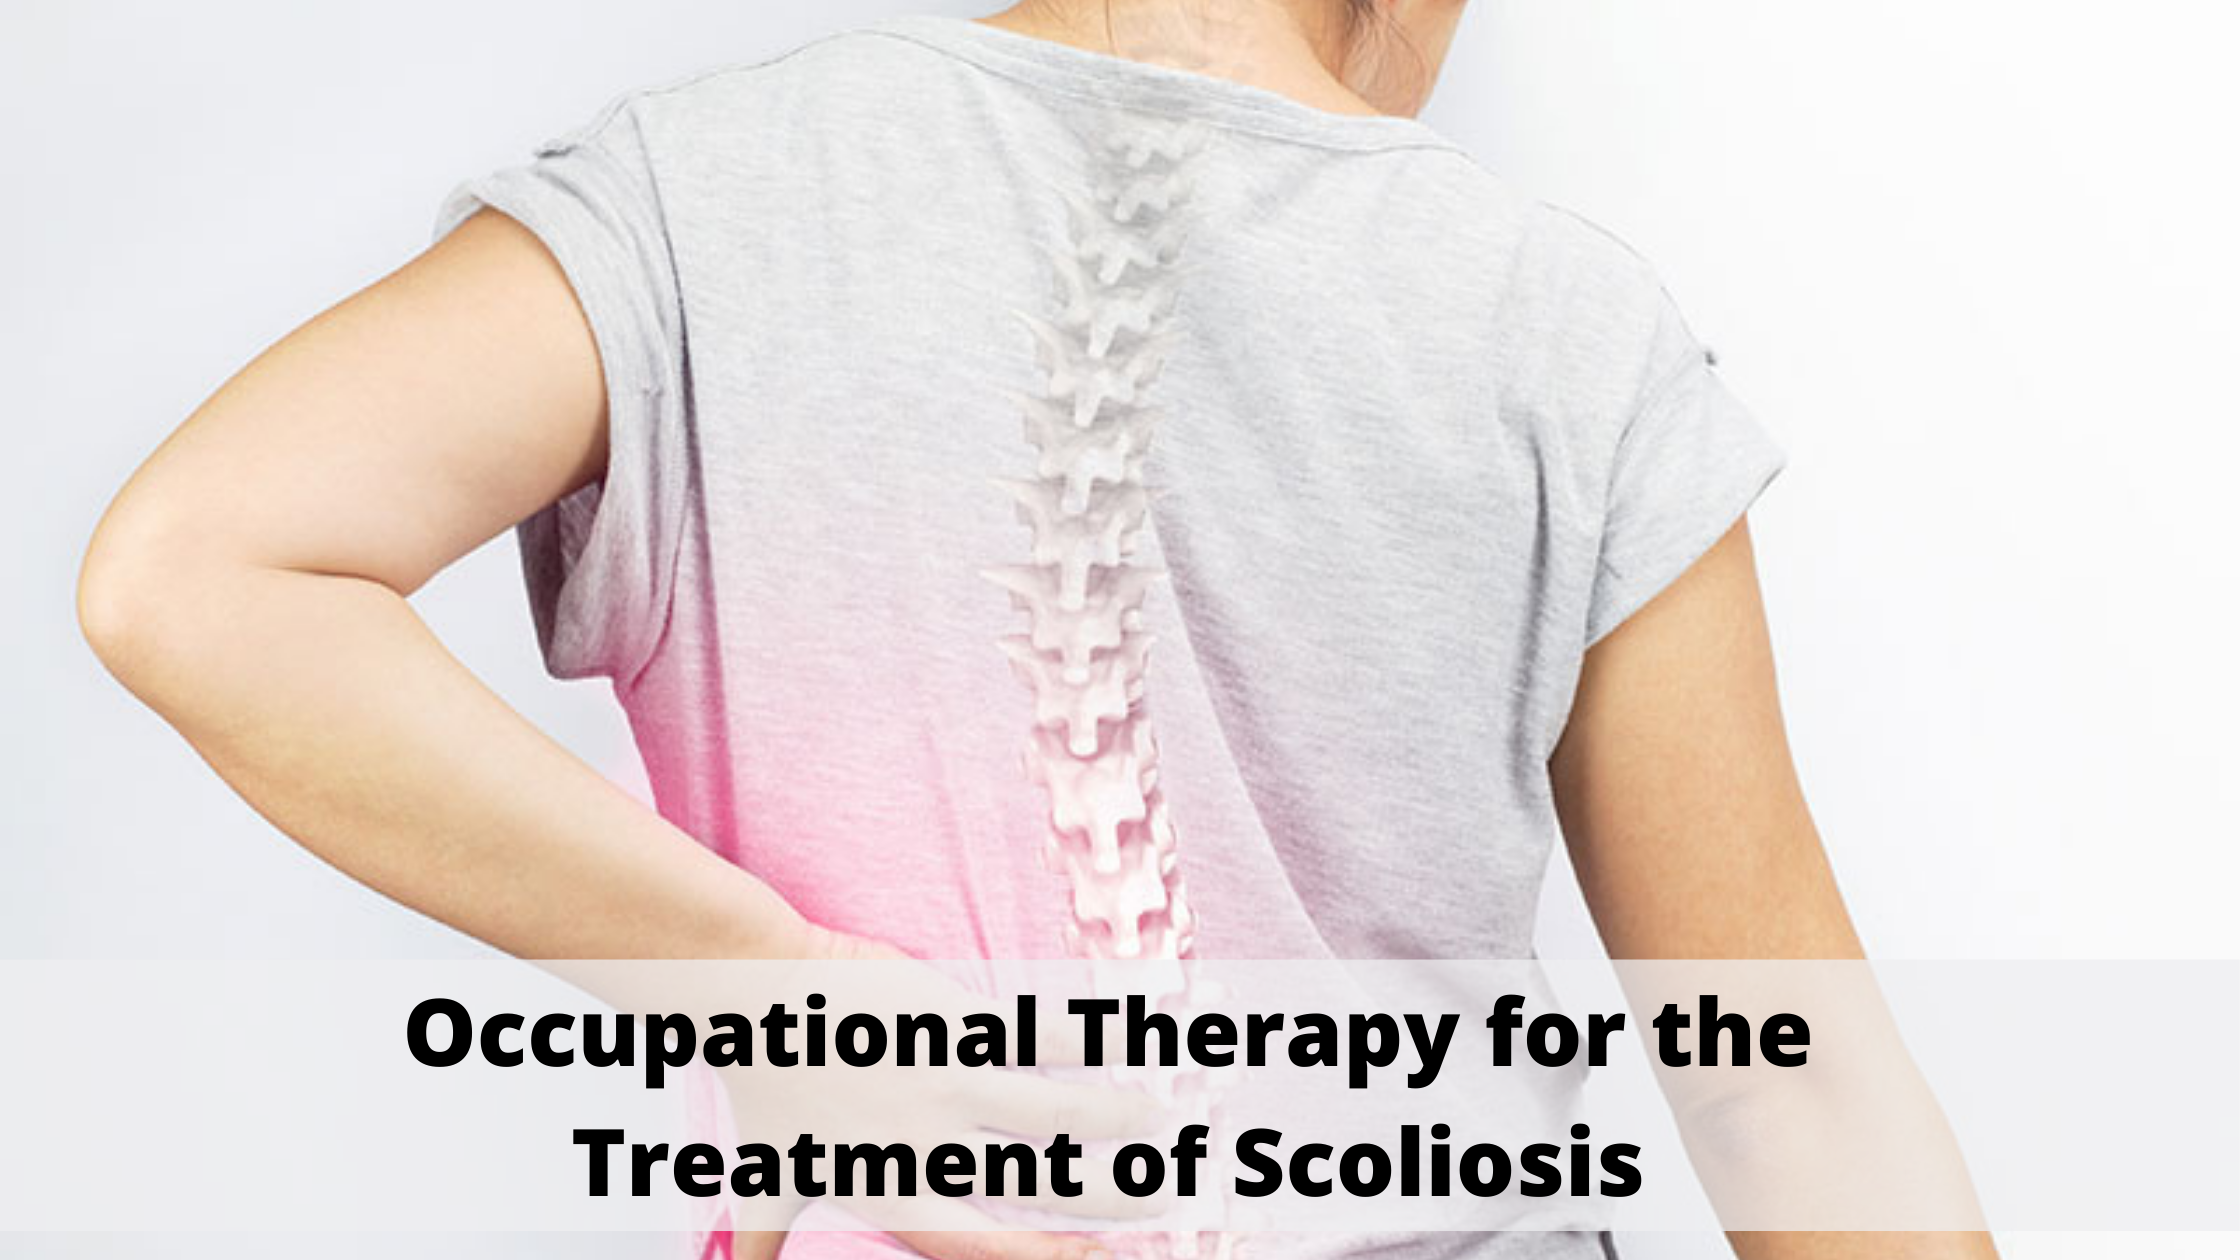 Occupational Therapy for the Scoliosis